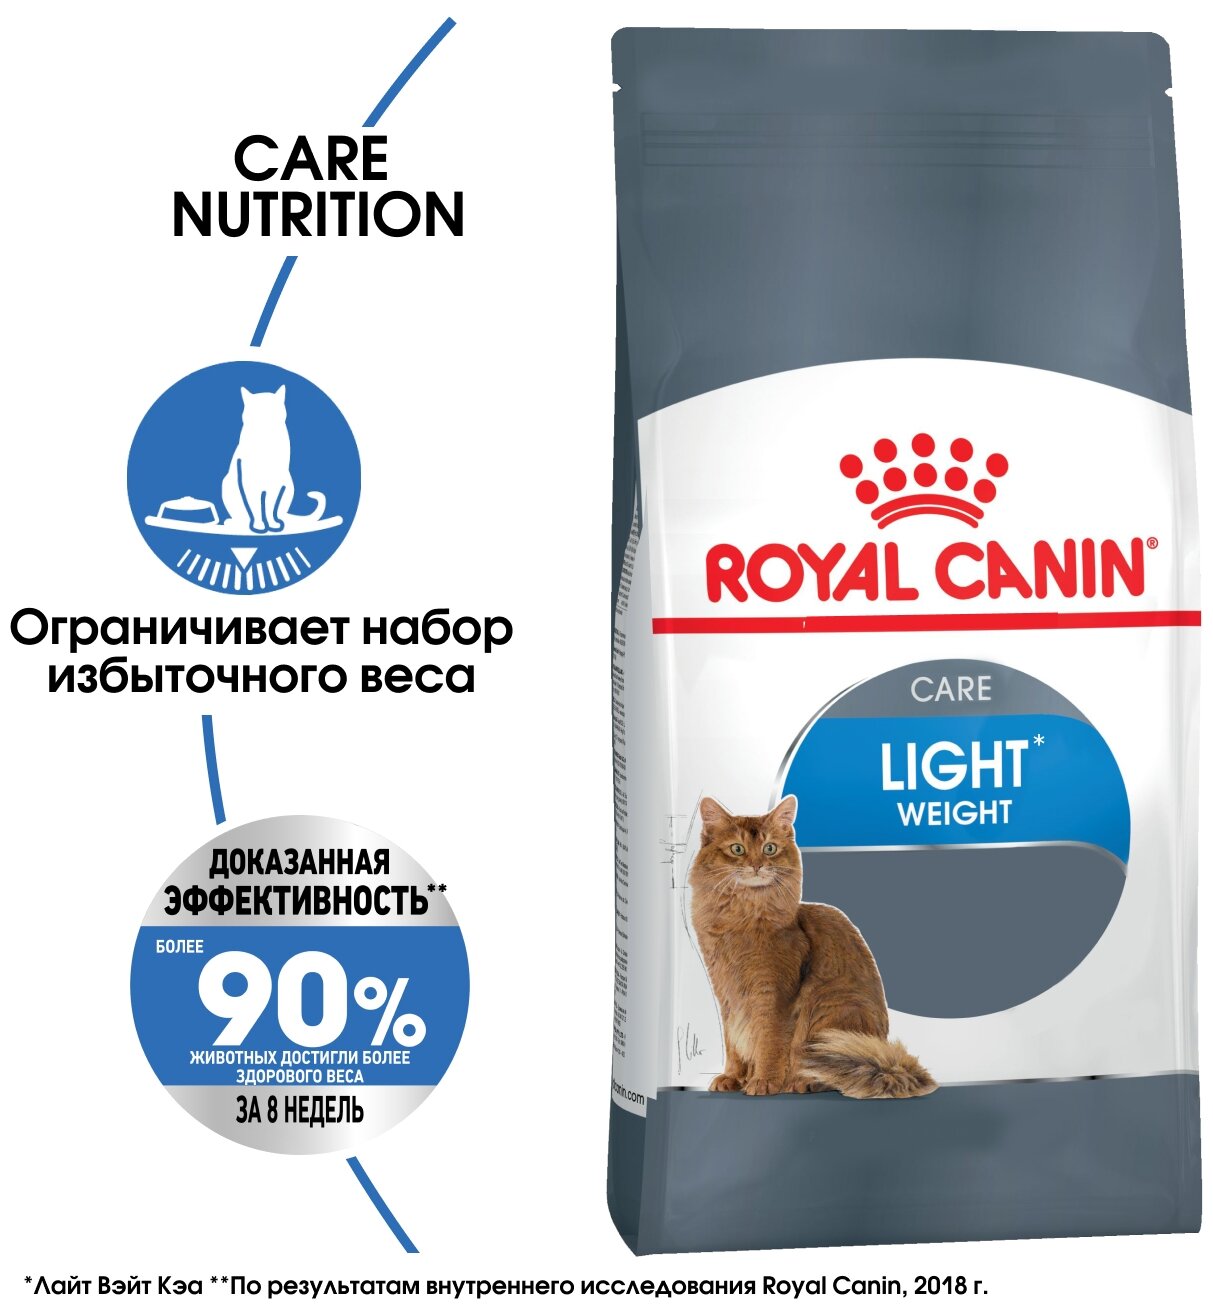 ROYAL CANIN LIGHT WEIGHT CARE     (3 )